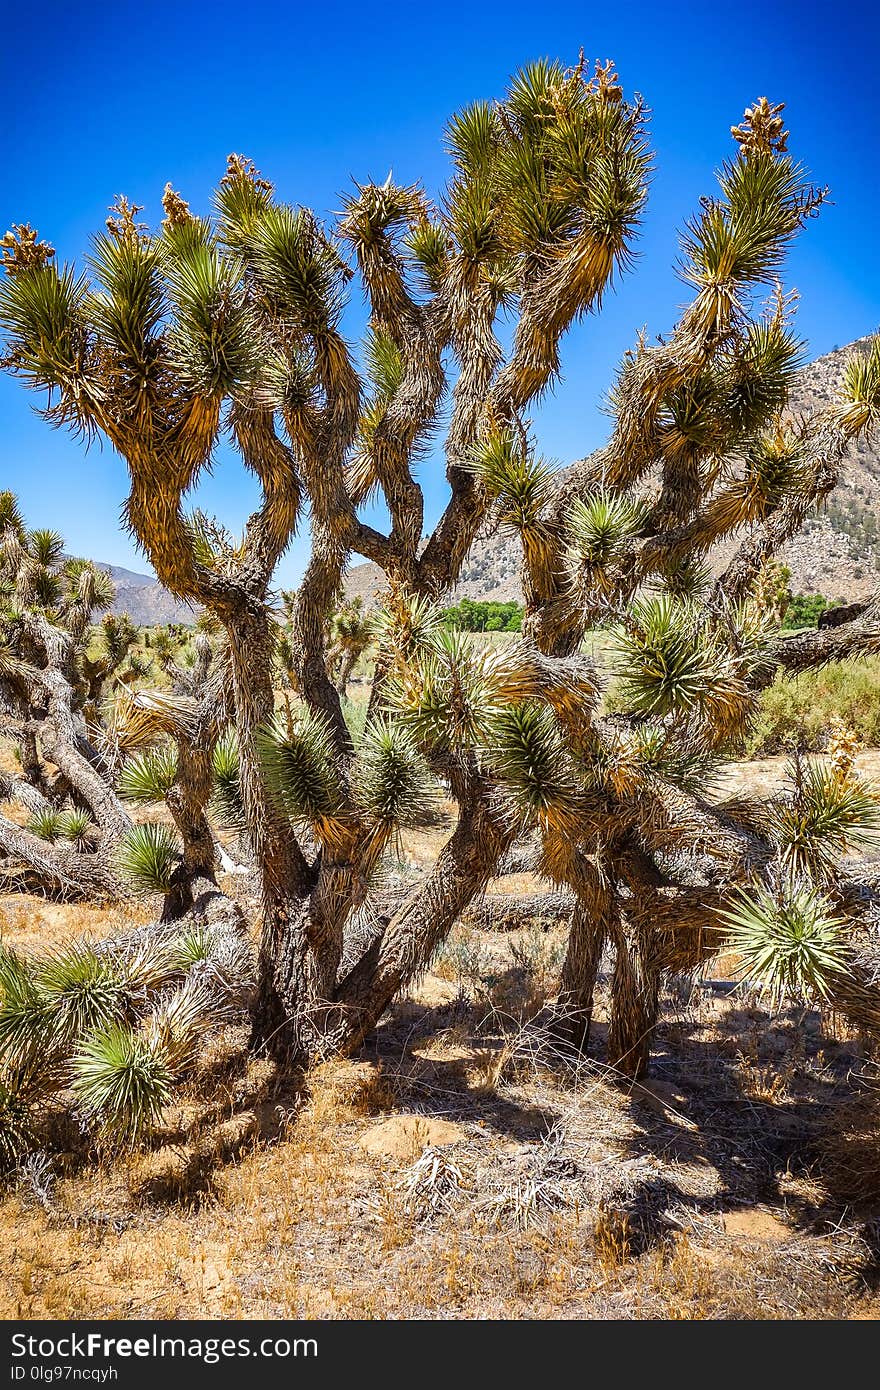 Joshua Tree National Park is an American national park in southeastern California, east of Los Angeles, near Palm Springs. The park is named for the Joshua trees Yucca brevifolia native to the Mojave Desert. Joshua Tree National Park is an American national park in southeastern California, east of Los Angeles, near Palm Springs. The park is named for the Joshua trees Yucca brevifolia native to the Mojave Desert.